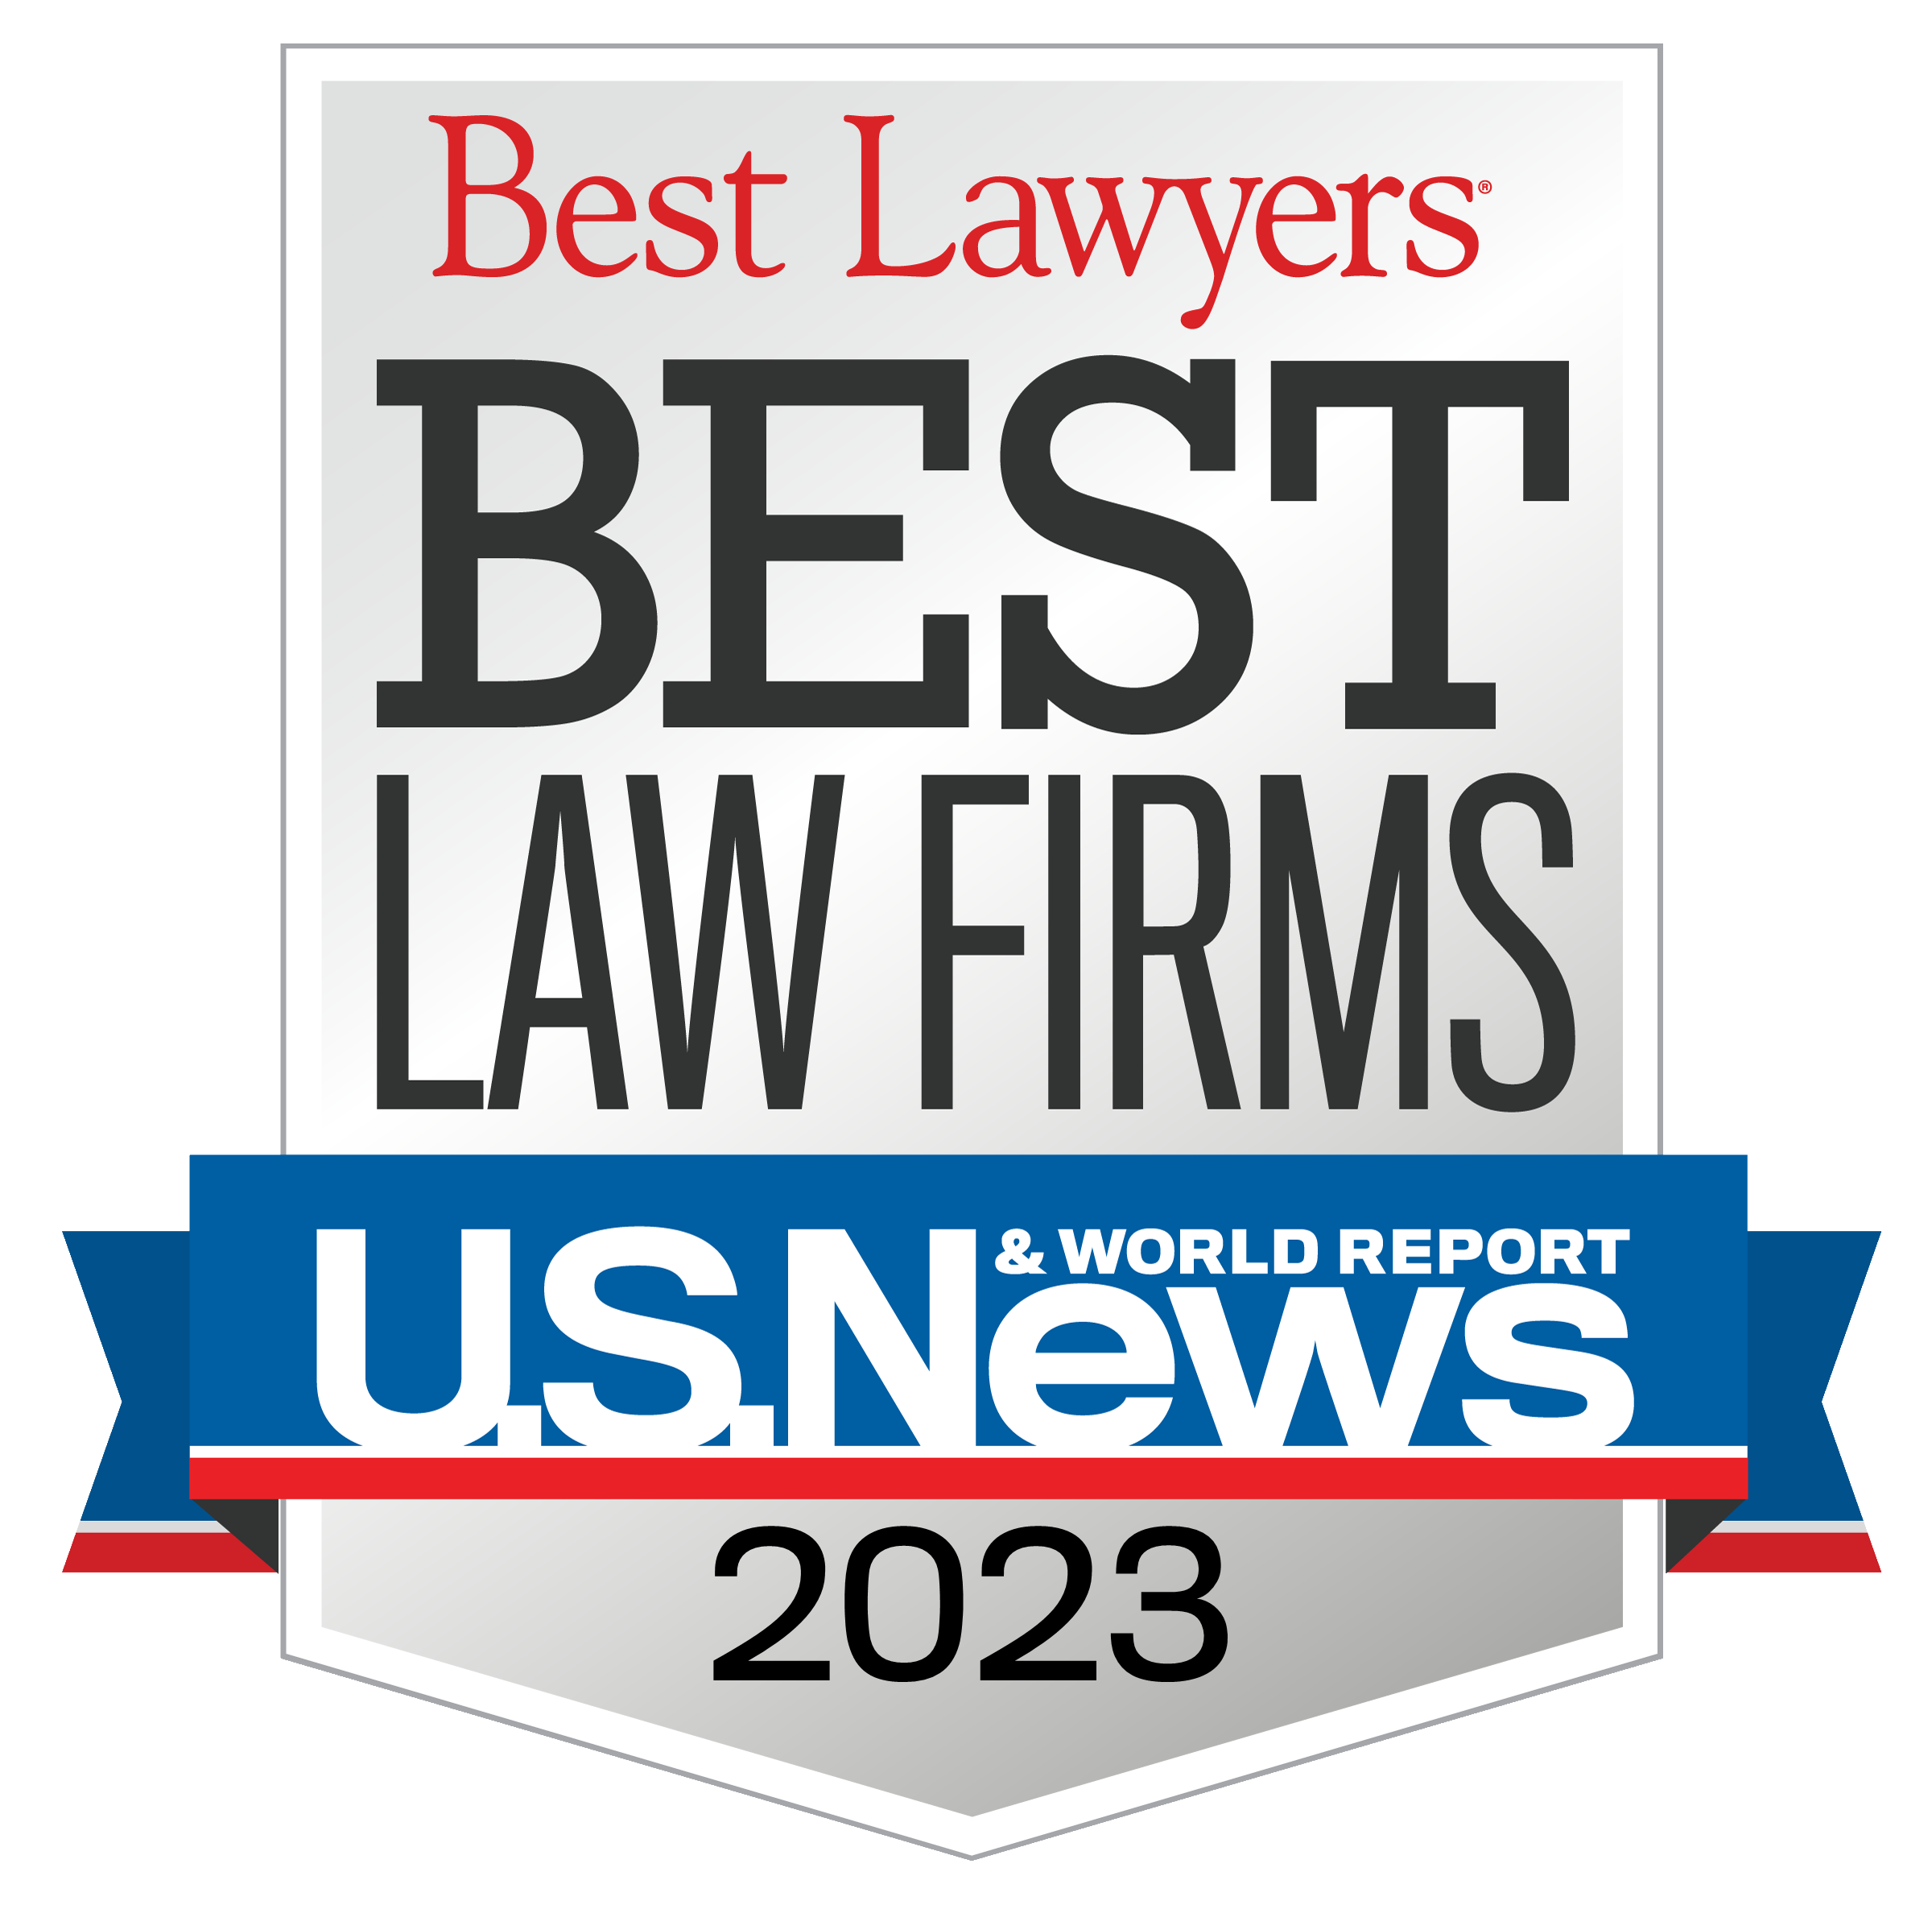 Best Law Firm Award 2023 for Terry Law Firm